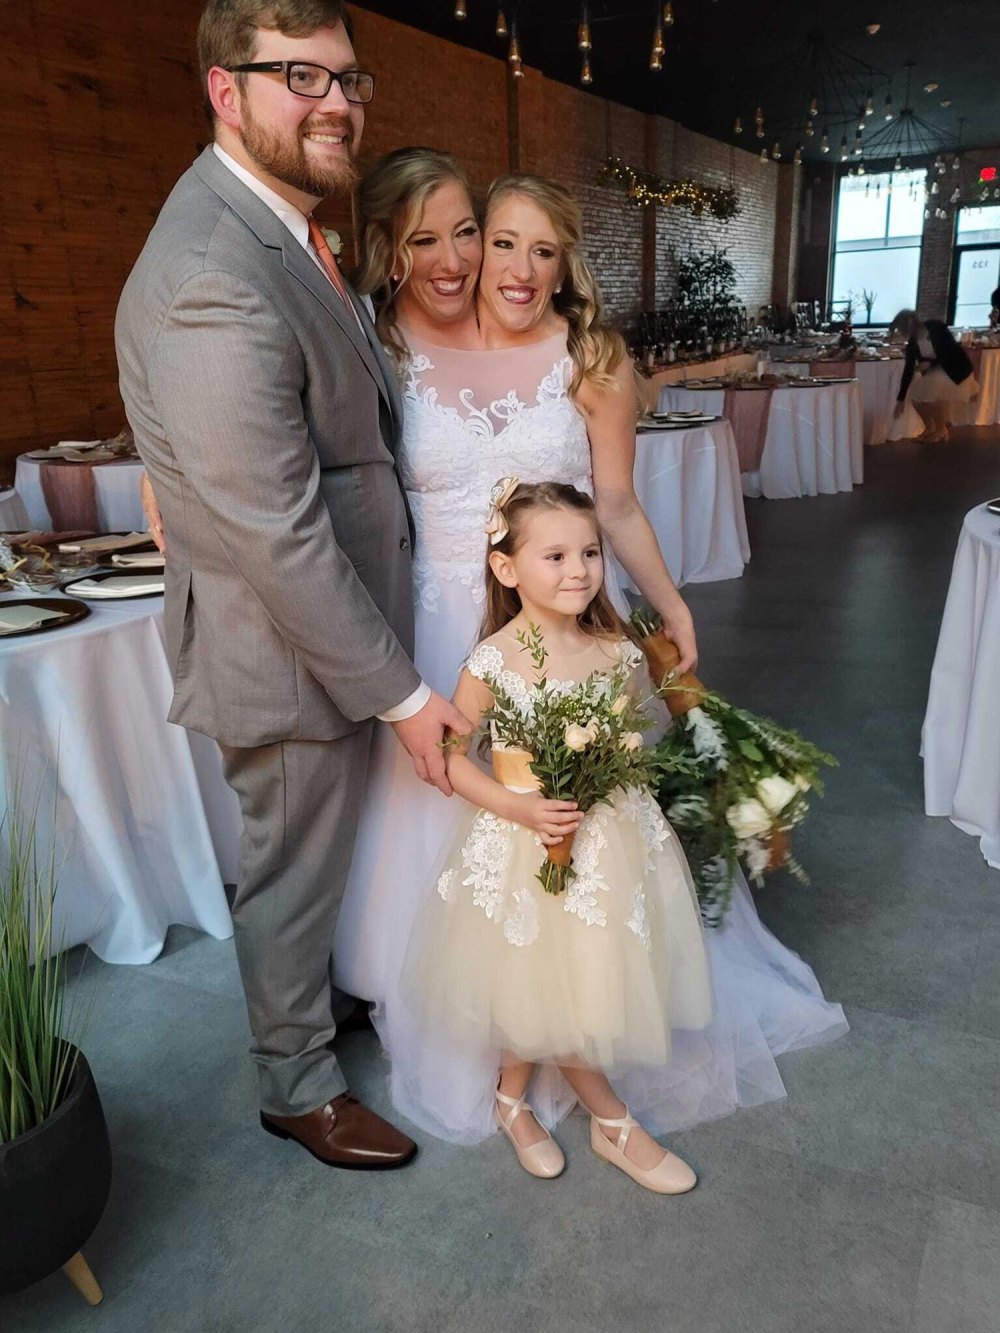 Watch Conjoined Twin Abby’s 1st Wedding Dance to Josh Bowling